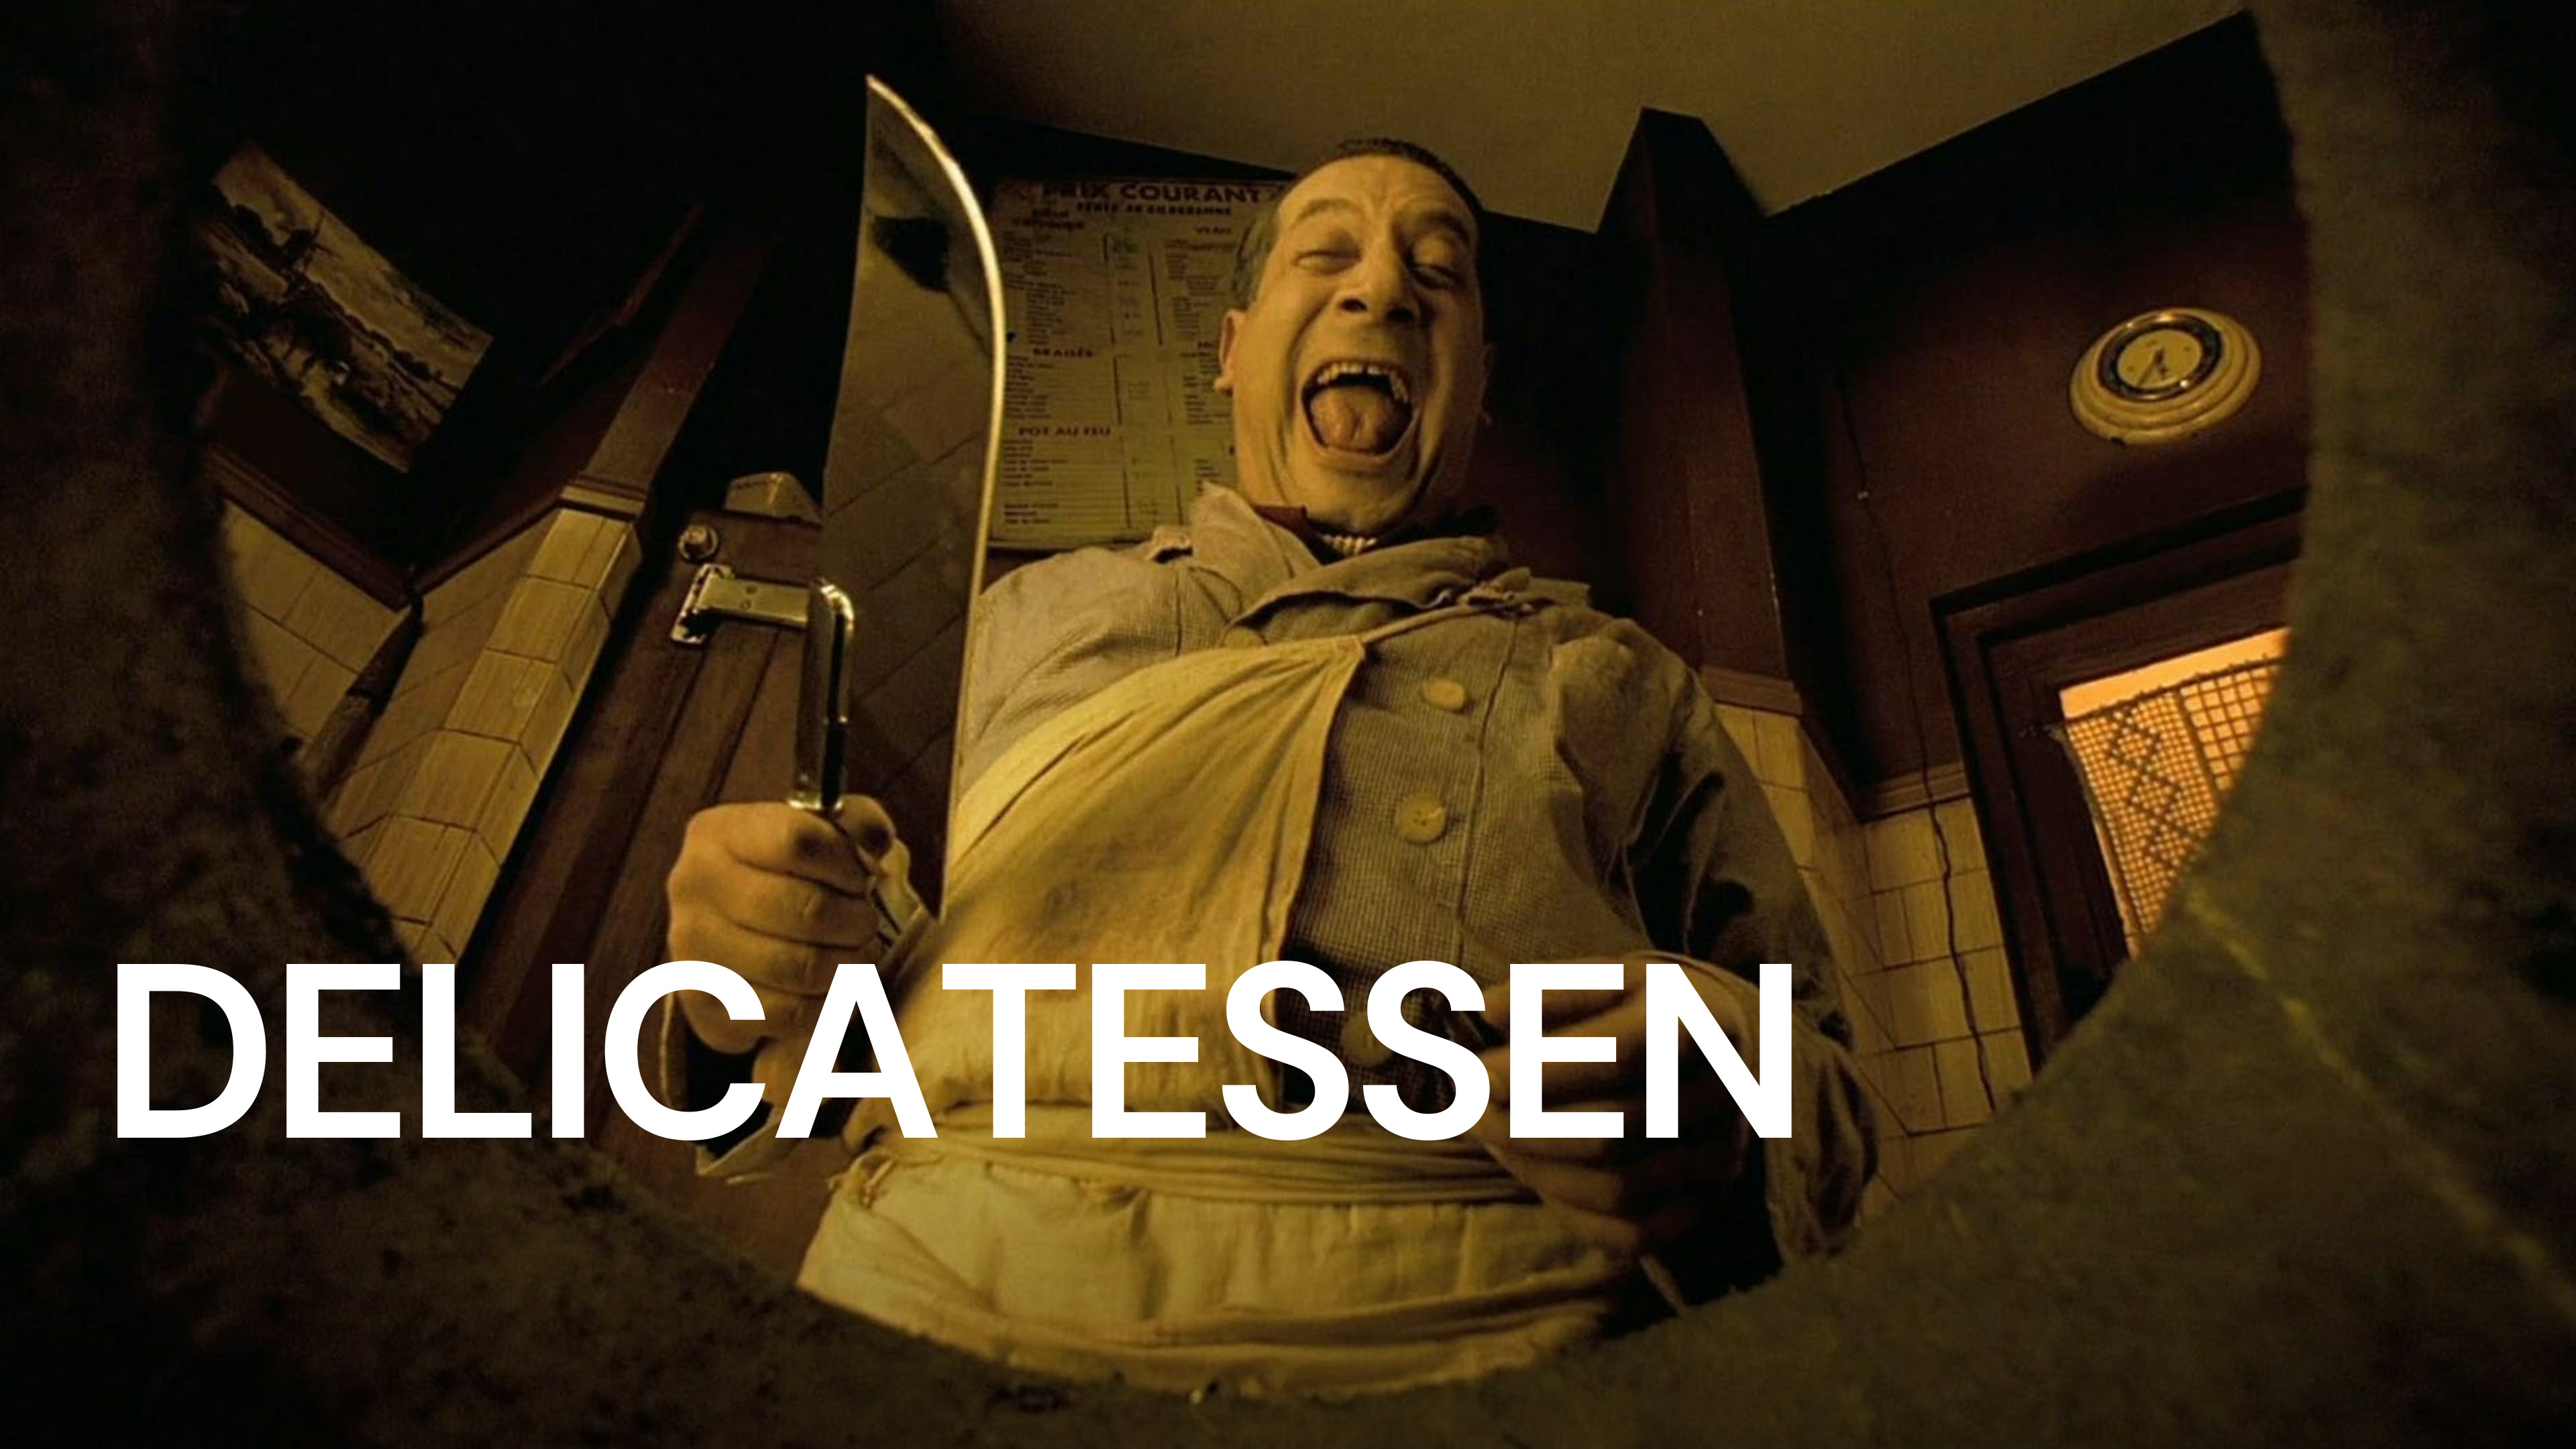 43-facts-about-the-movie-delicatessen